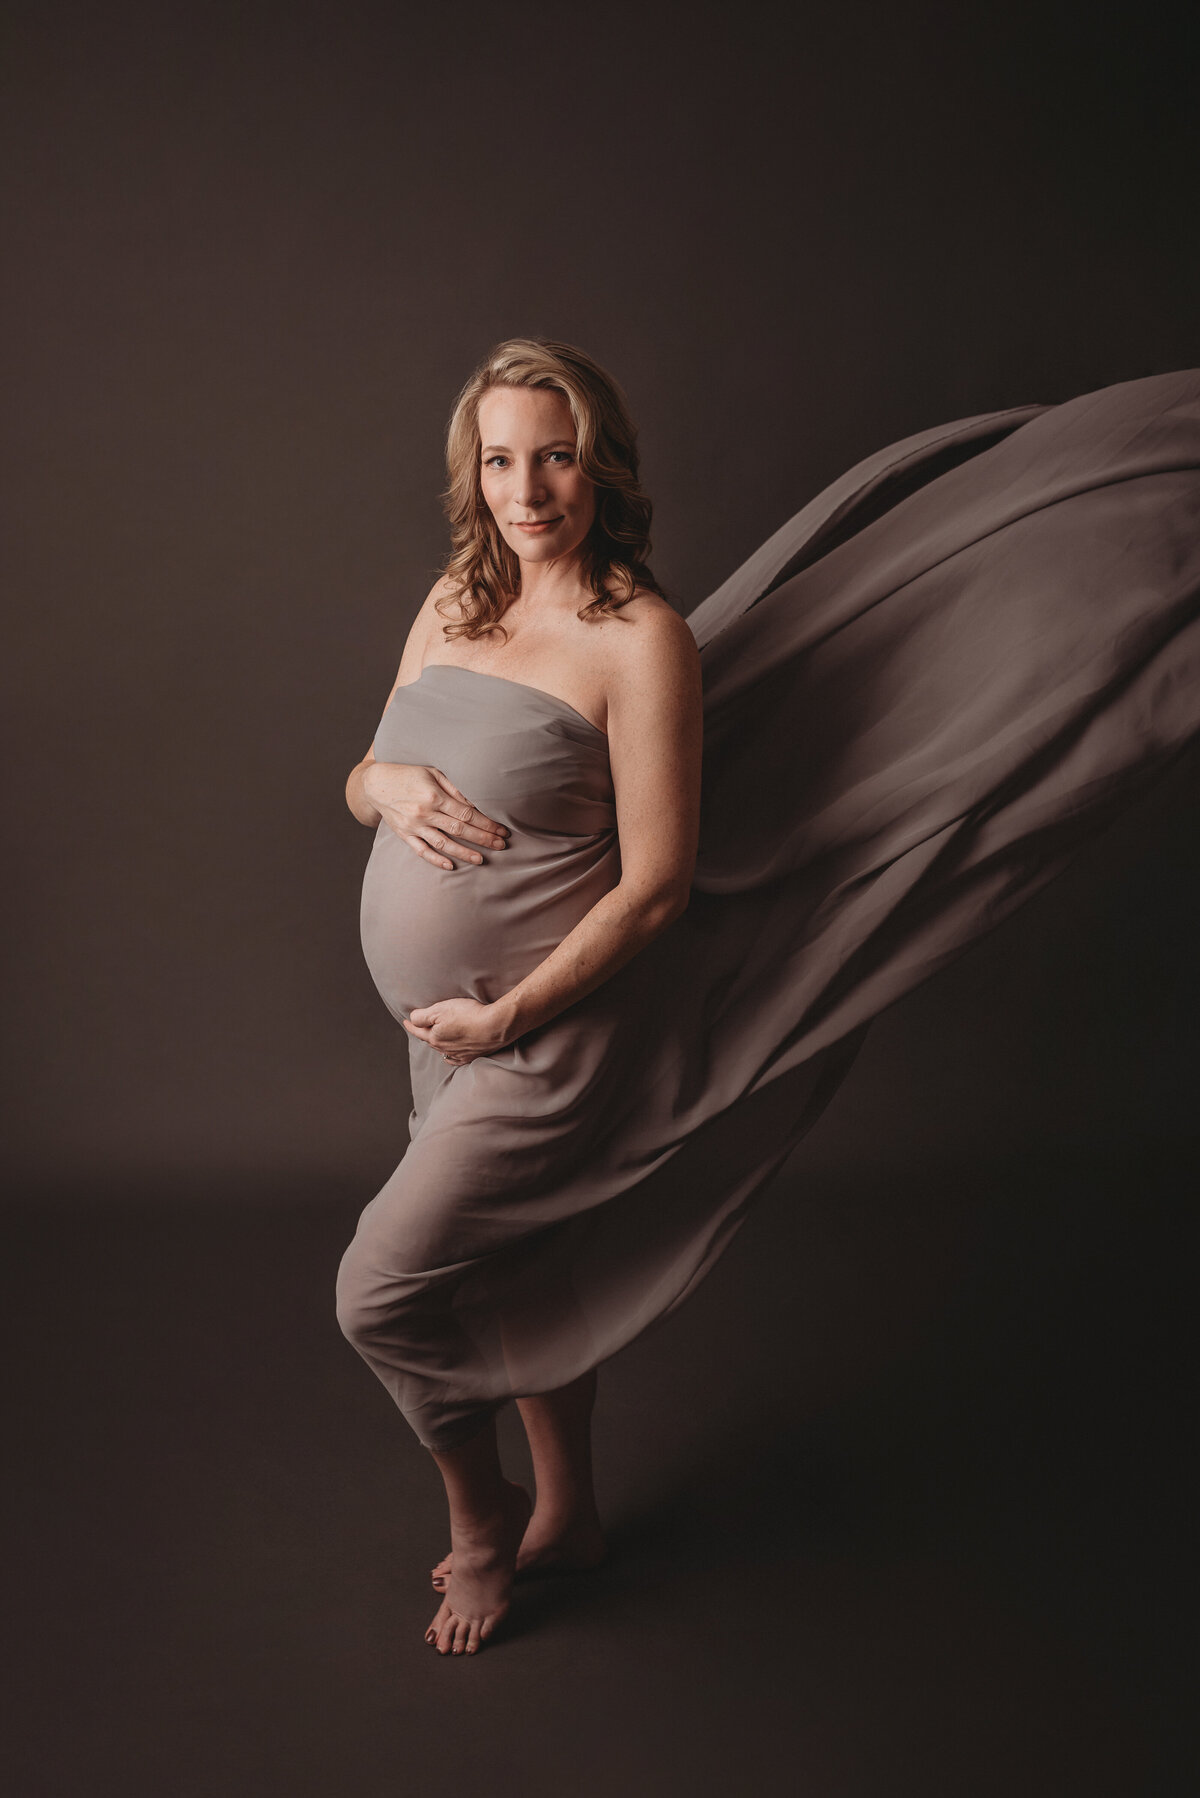 Pregnant woman photographed by atlanta maternity photographer Casey McMinn Photography standing on gray backdrop draped in gray chiffon fabric holding baby bump looking at camera